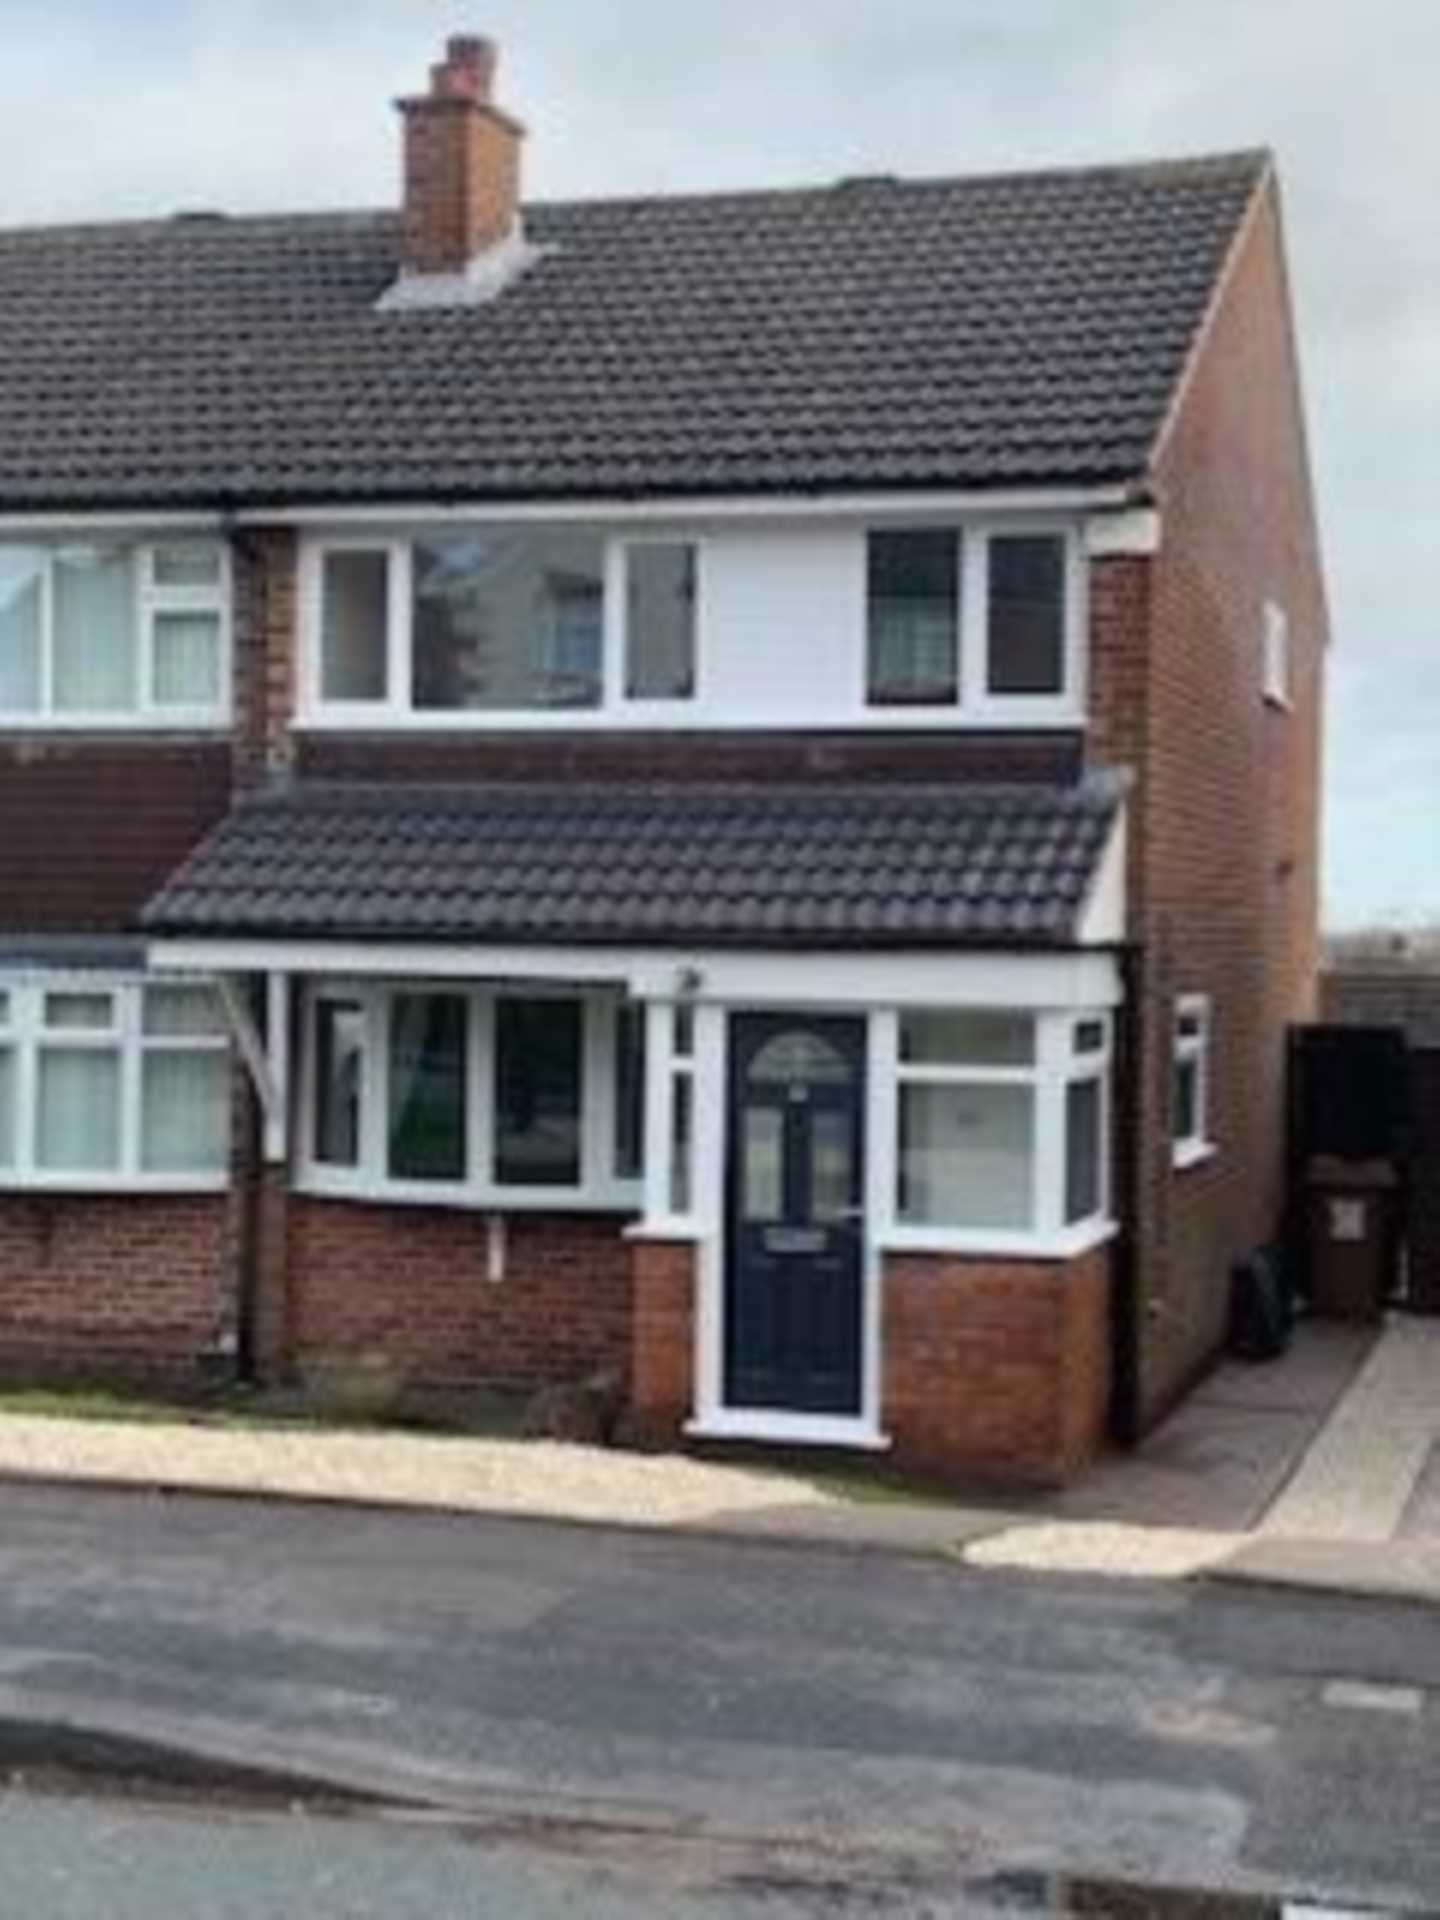 3 bed Semi-Detached House for rent in Sutton Coldfield. From Freemove